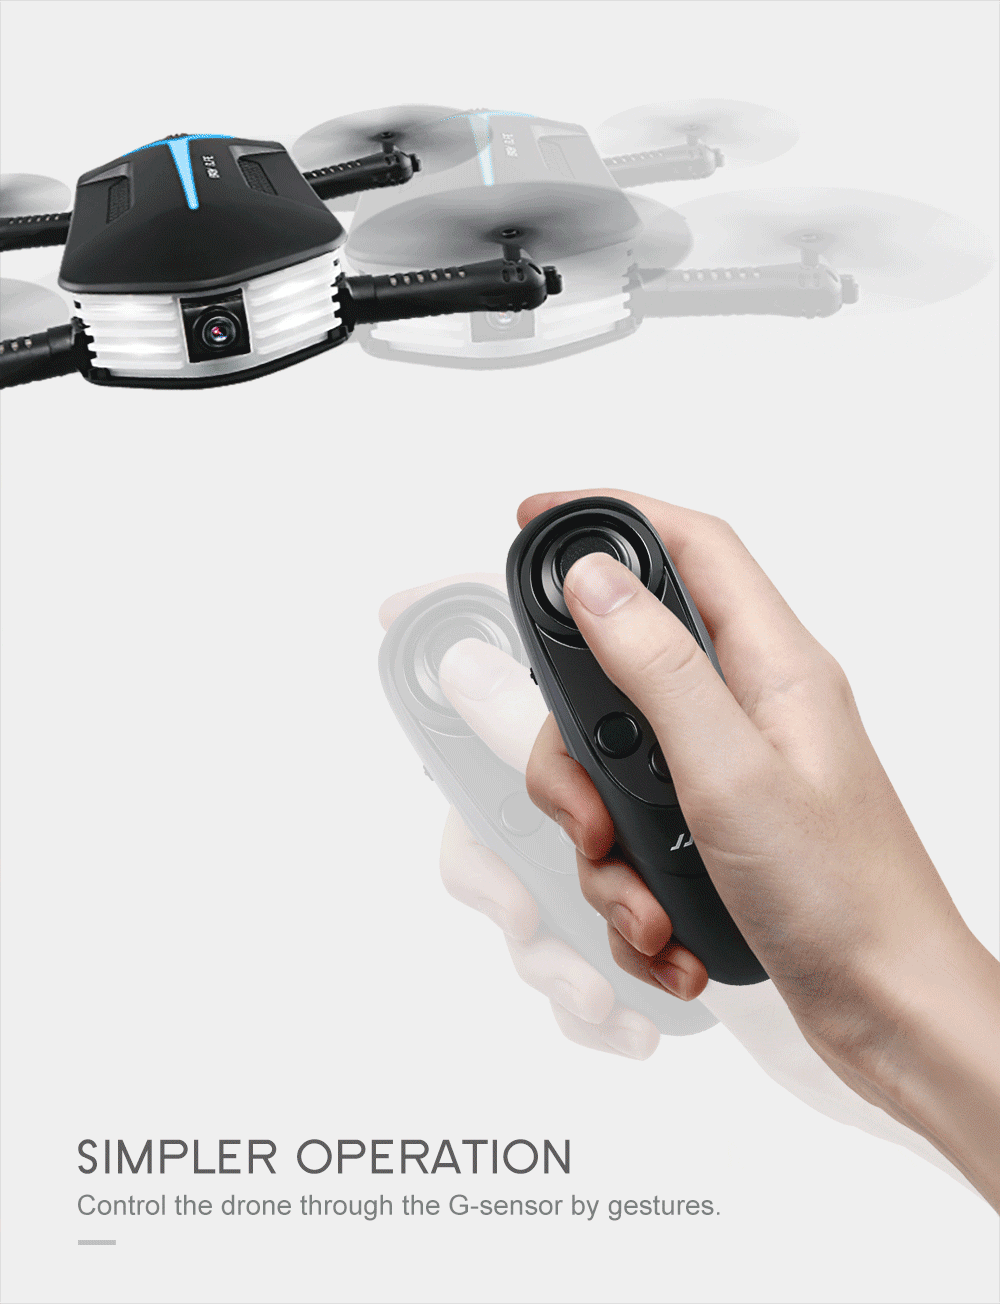 JJRC H37 Mini Baby Elfie WIFI FPV Foldable Drone with HD 720P Camera Beauty Mode Altitude Hold RC Quadcopter RTF - Black